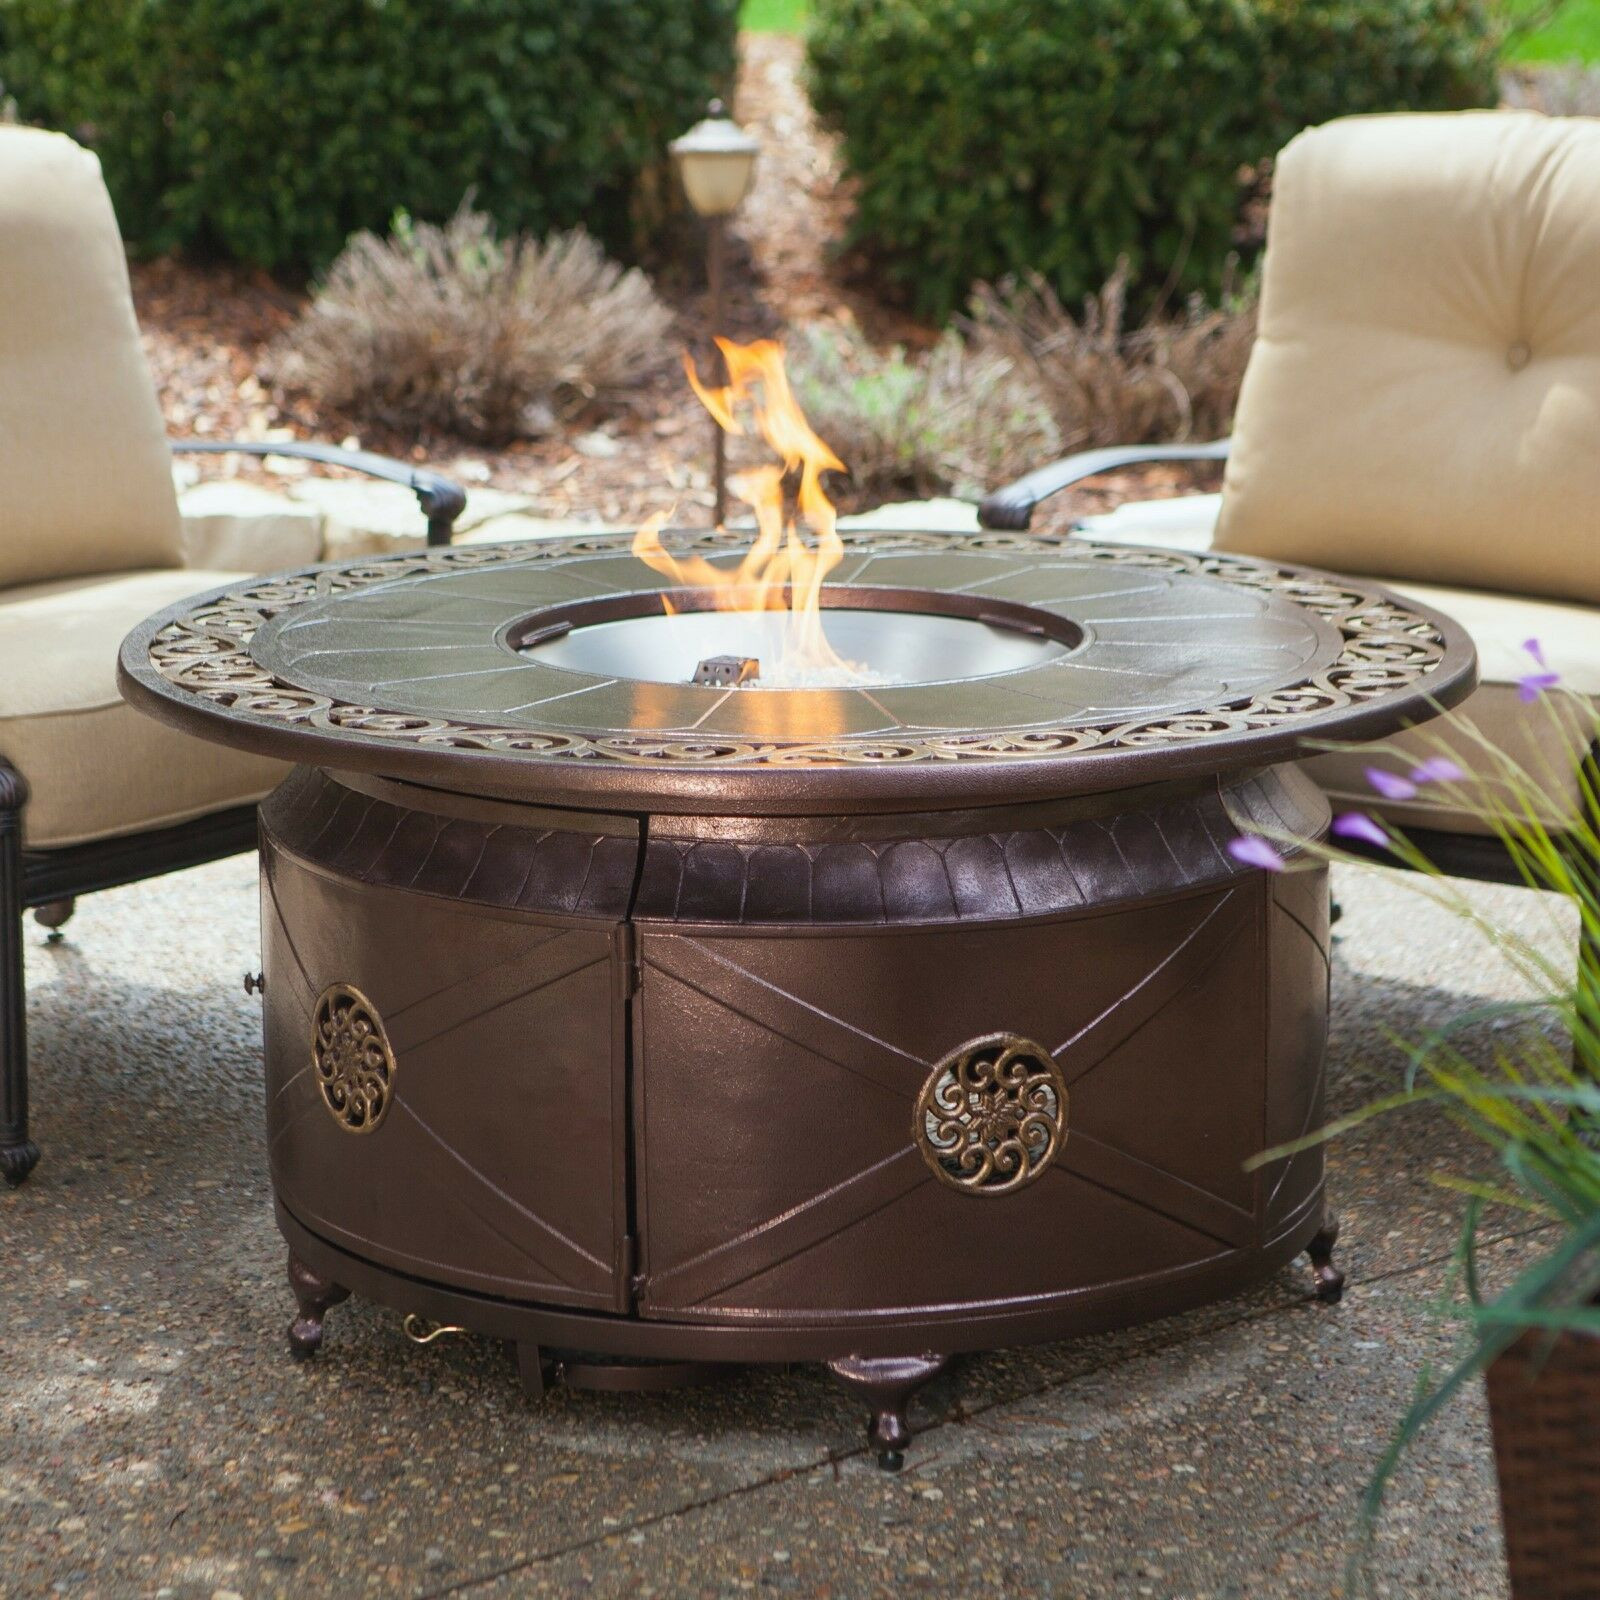 Outdoor Fire Pit Propane
 Fire Pit Table Burner Patio Deck Outdoor Fireplace Propane